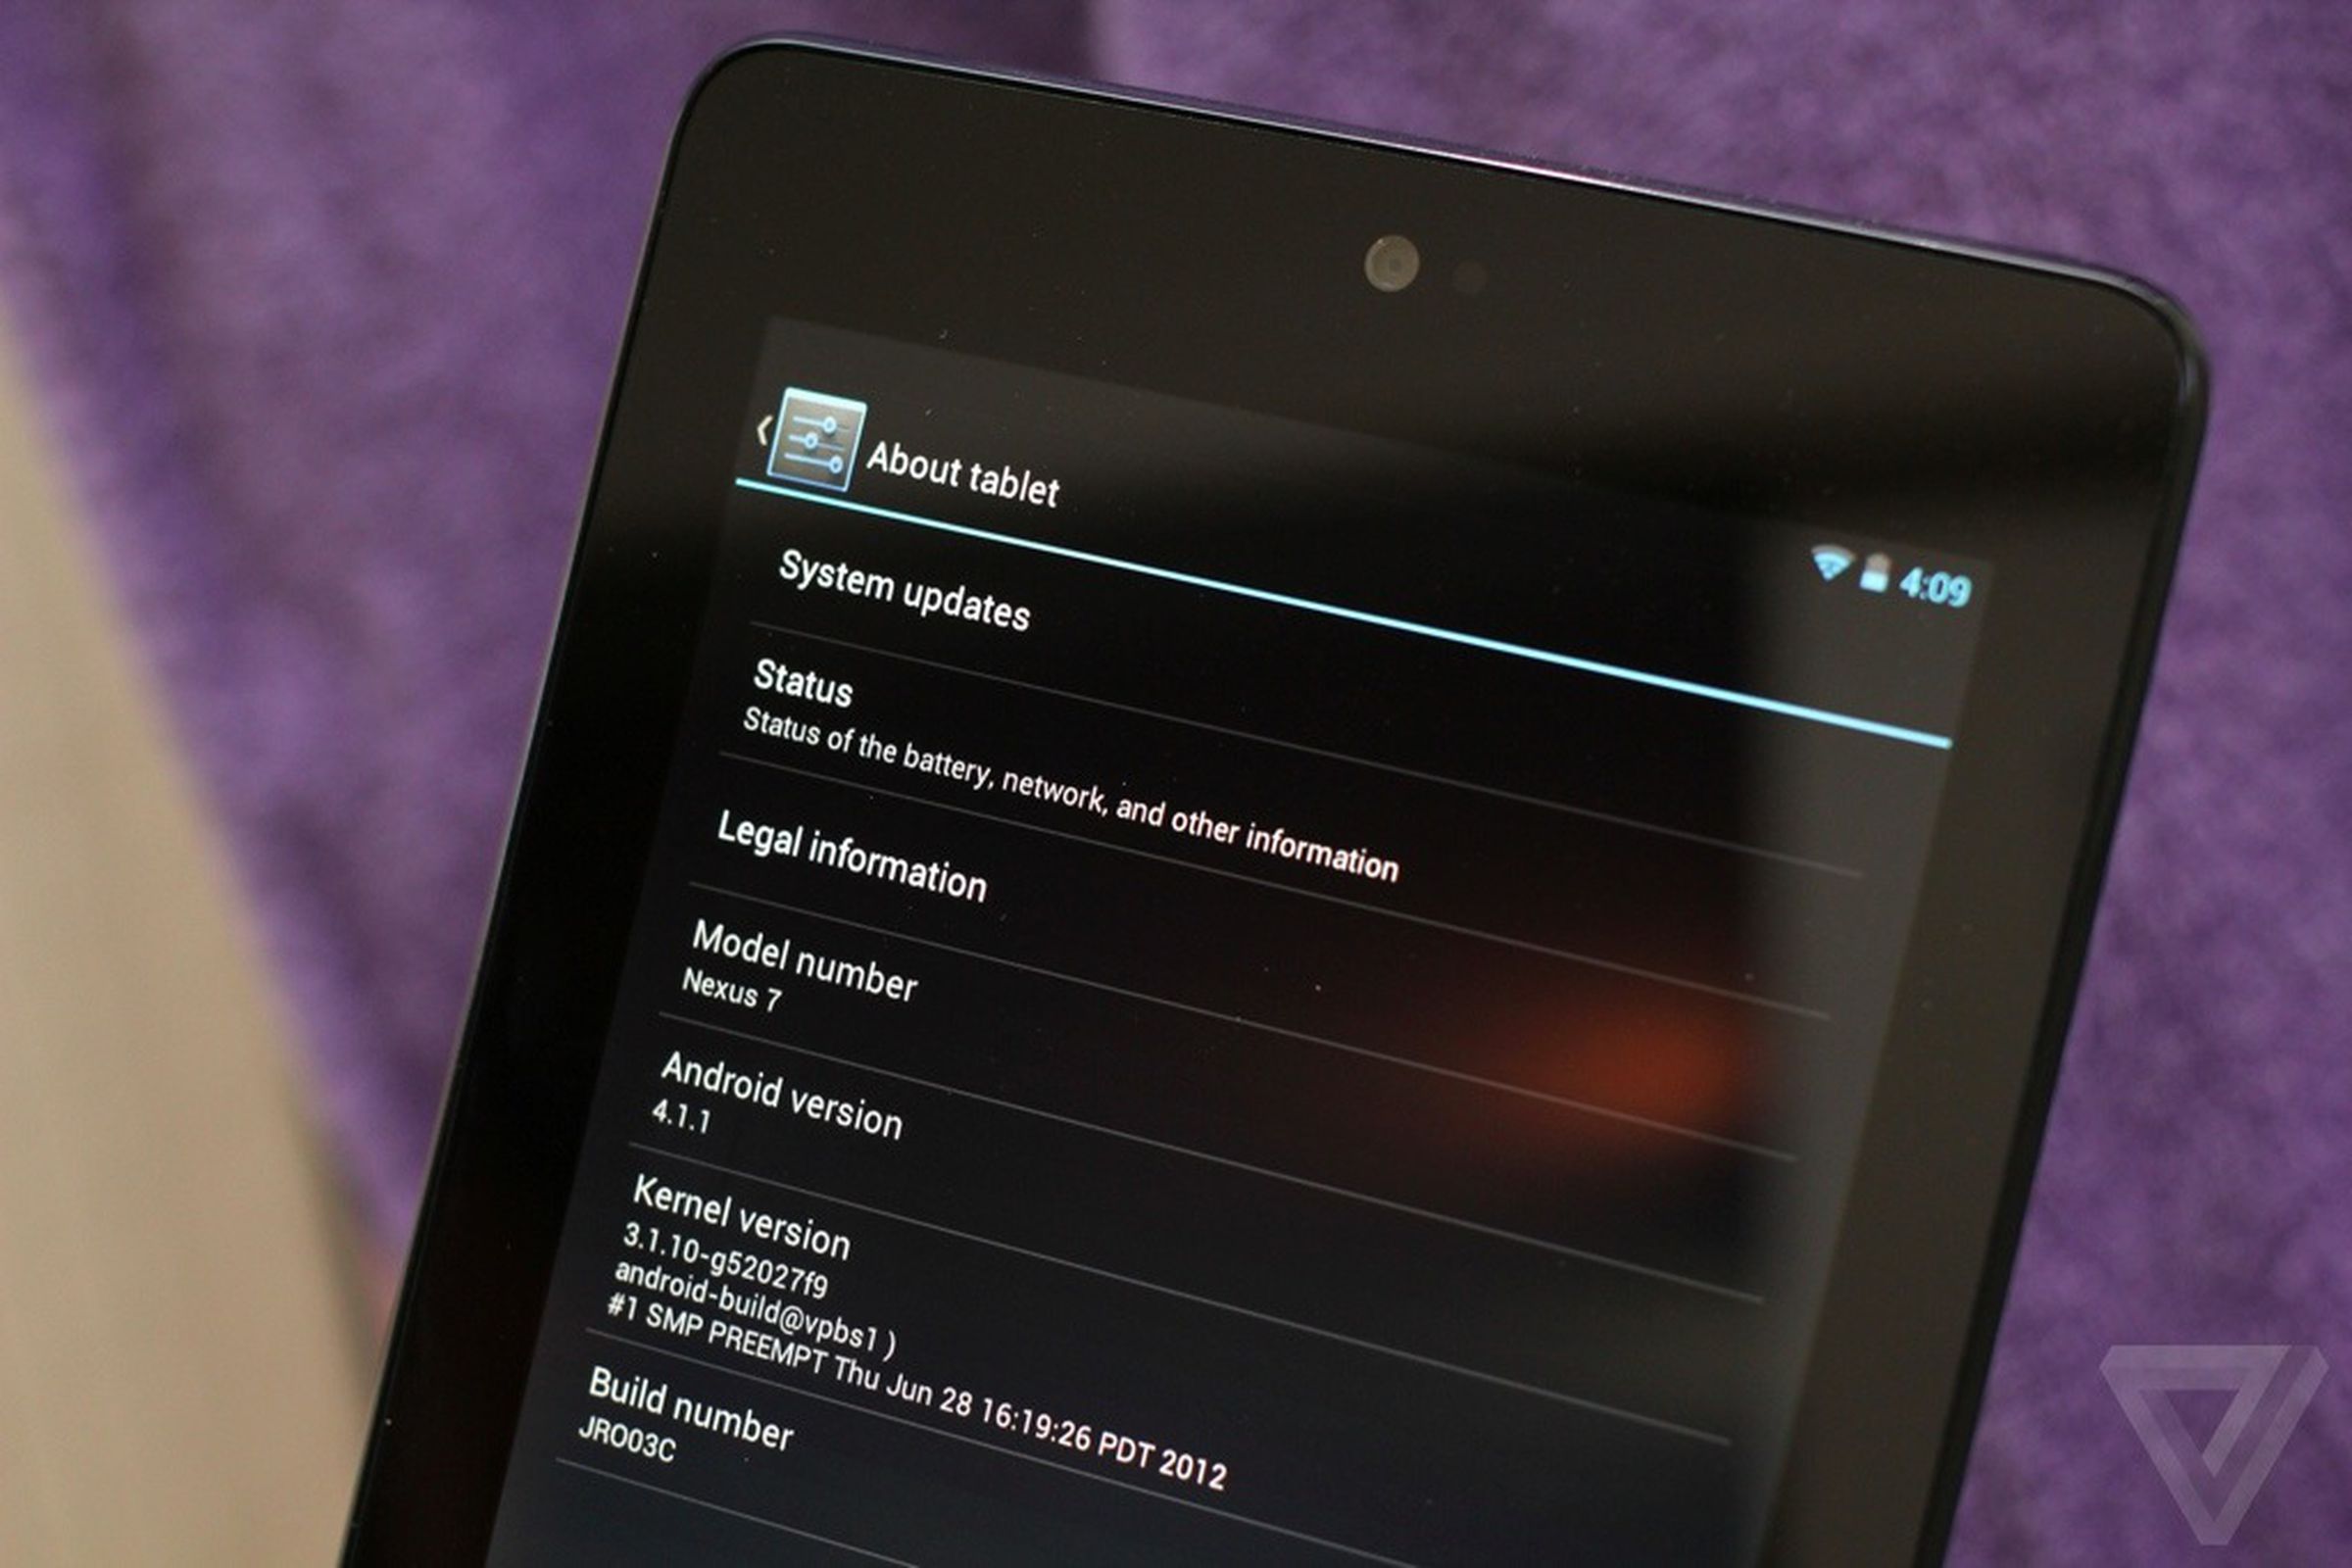 n7 android 4.1.1